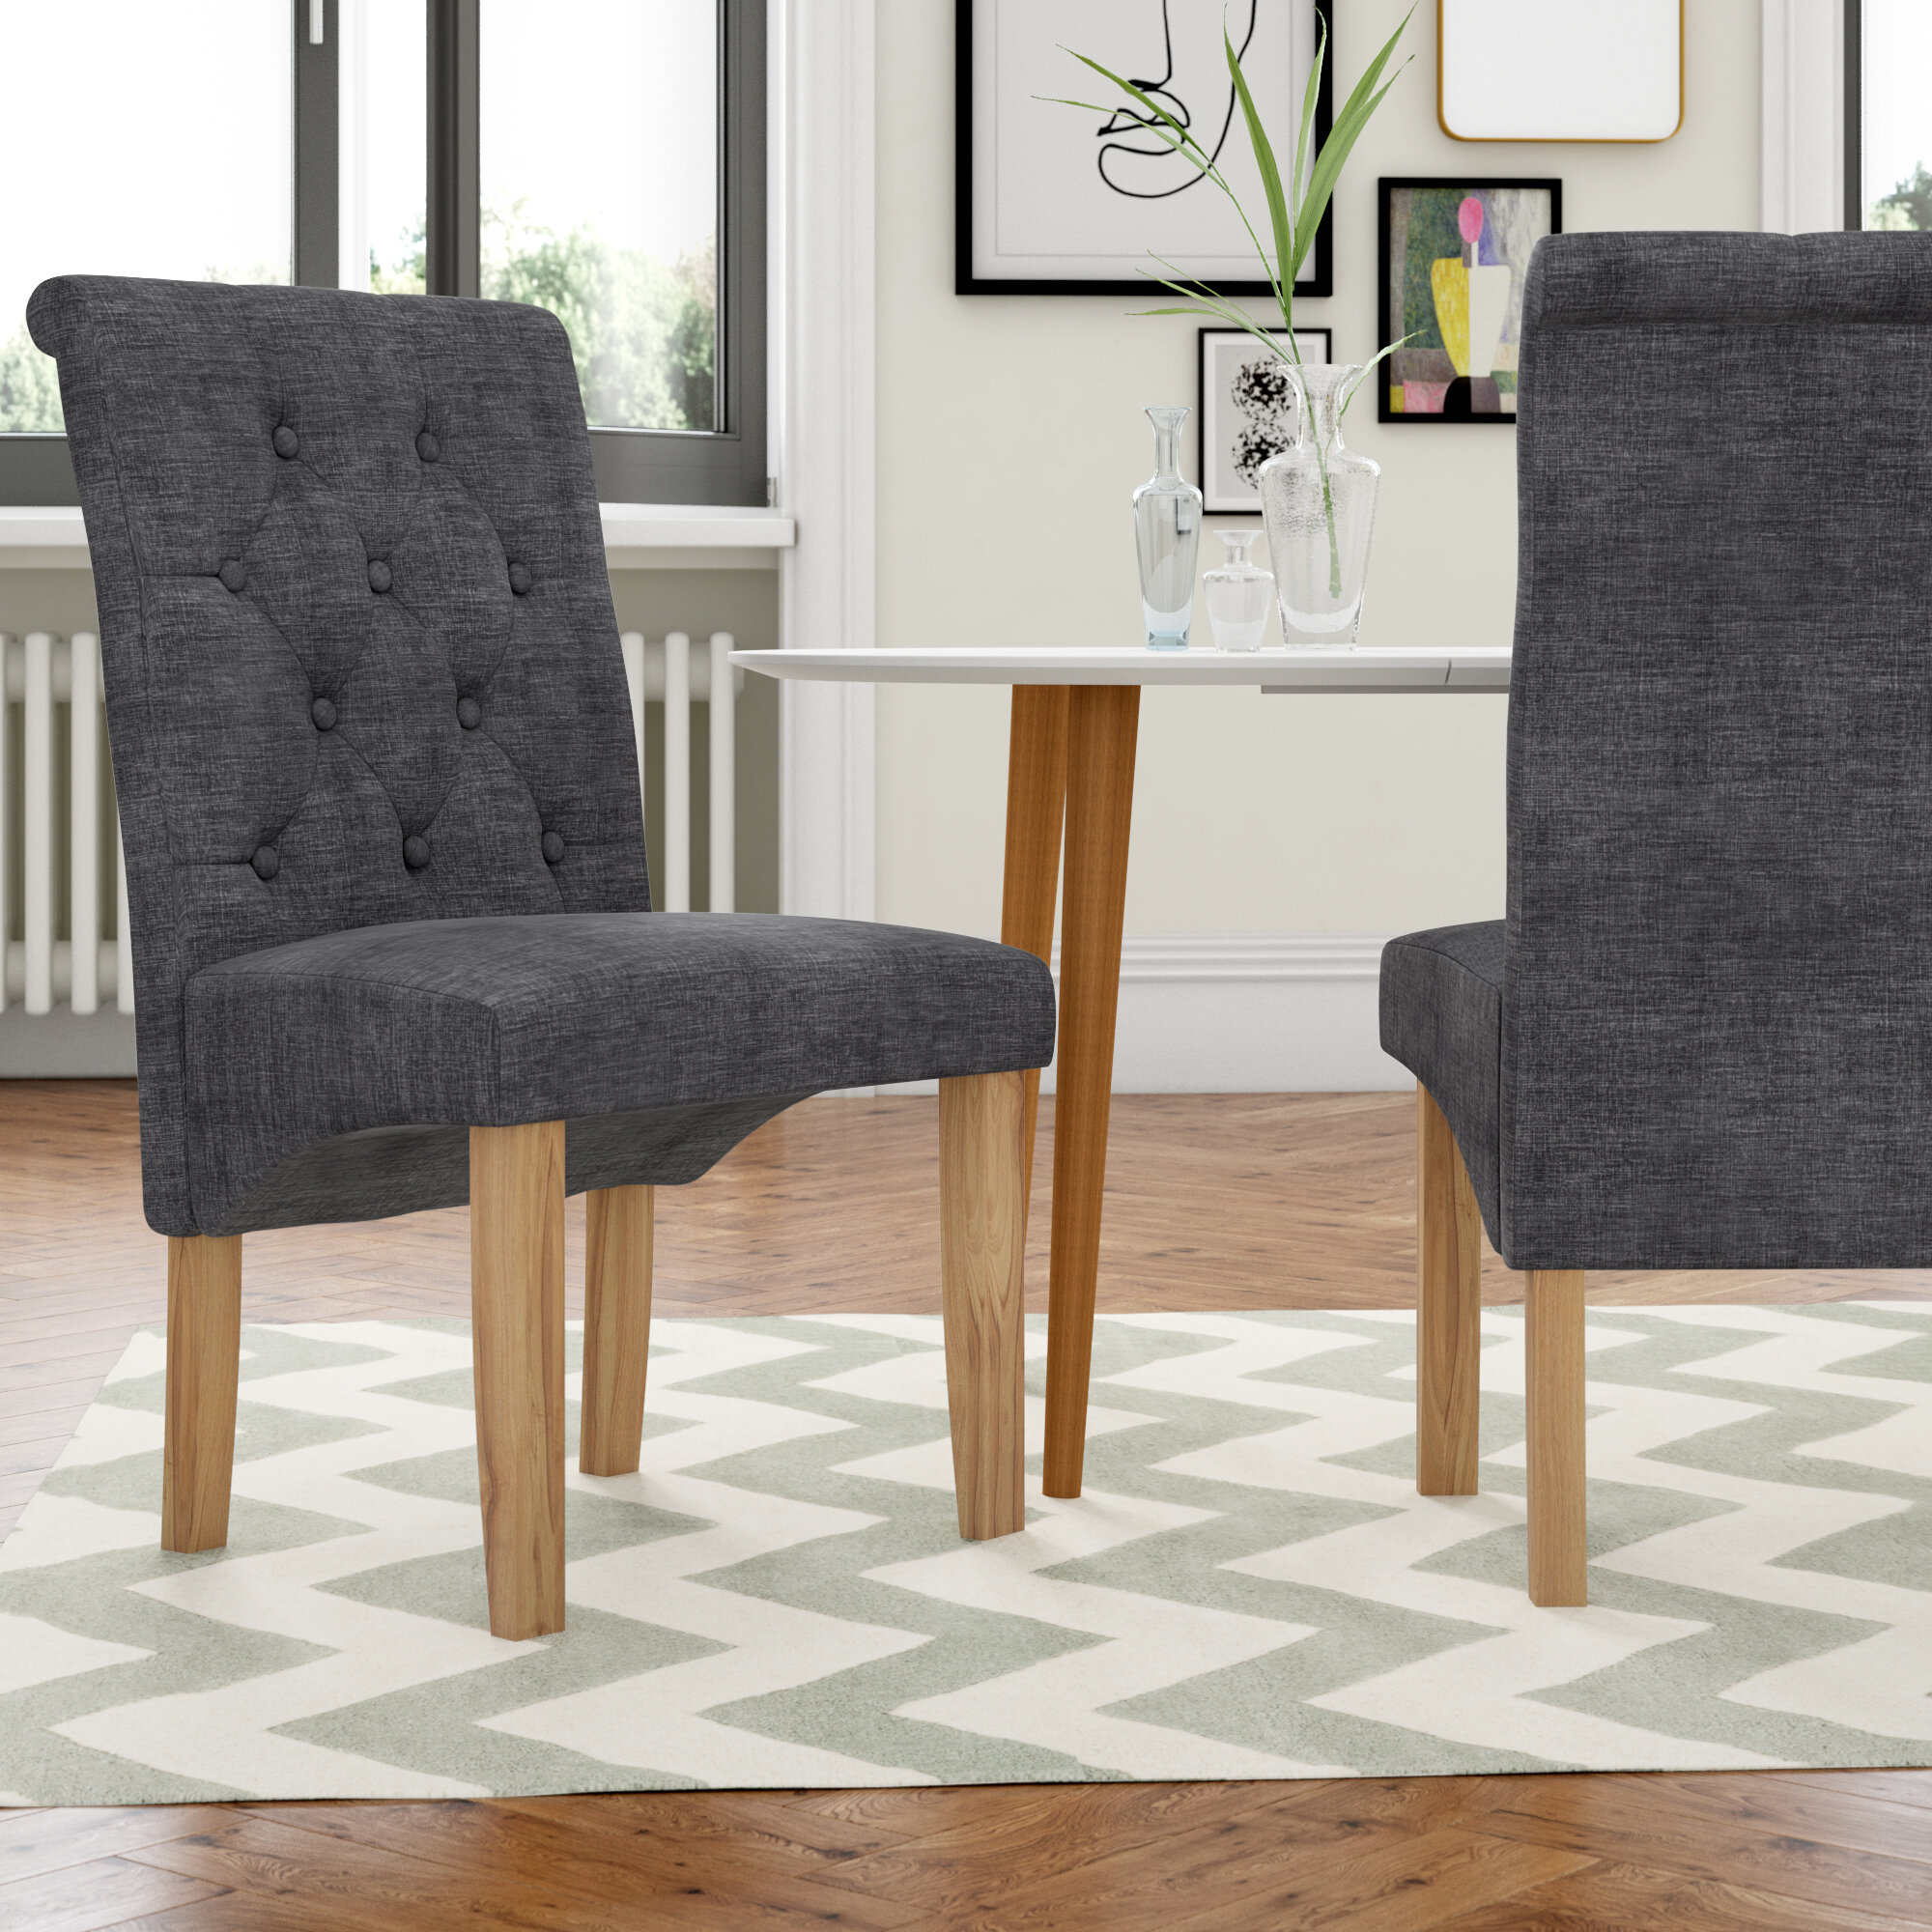 Ophelia Co Margaret Upholstered Dining Chair Reviews